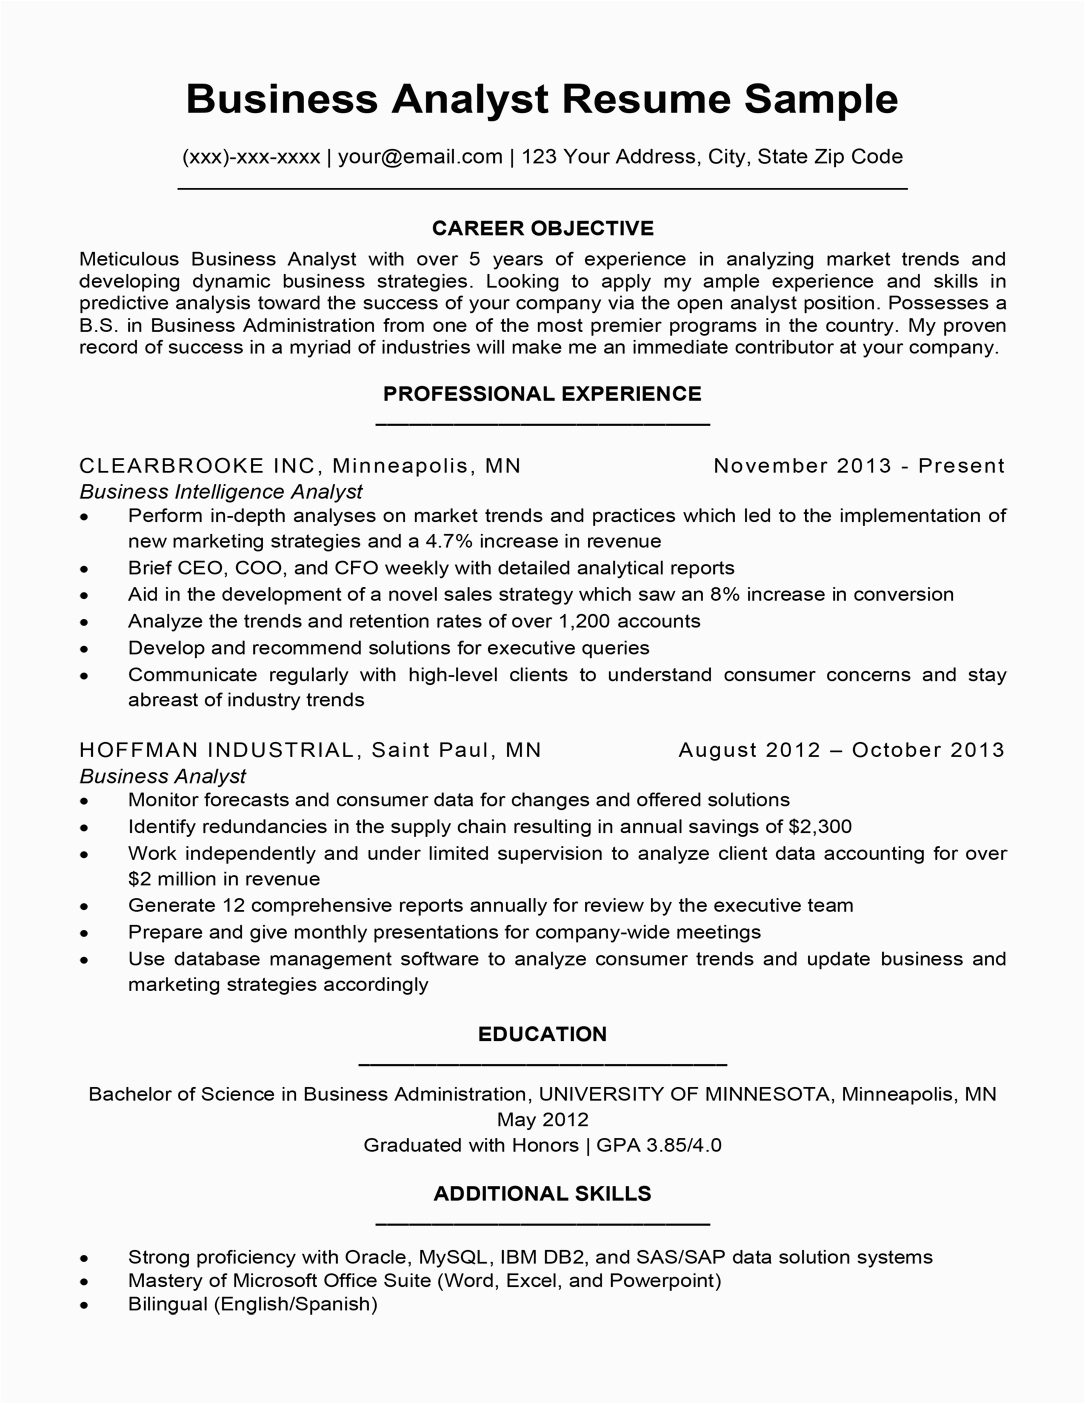 Sample Resume Summary for Business Analyst Business Analyst Resume Sample & Writing Tips